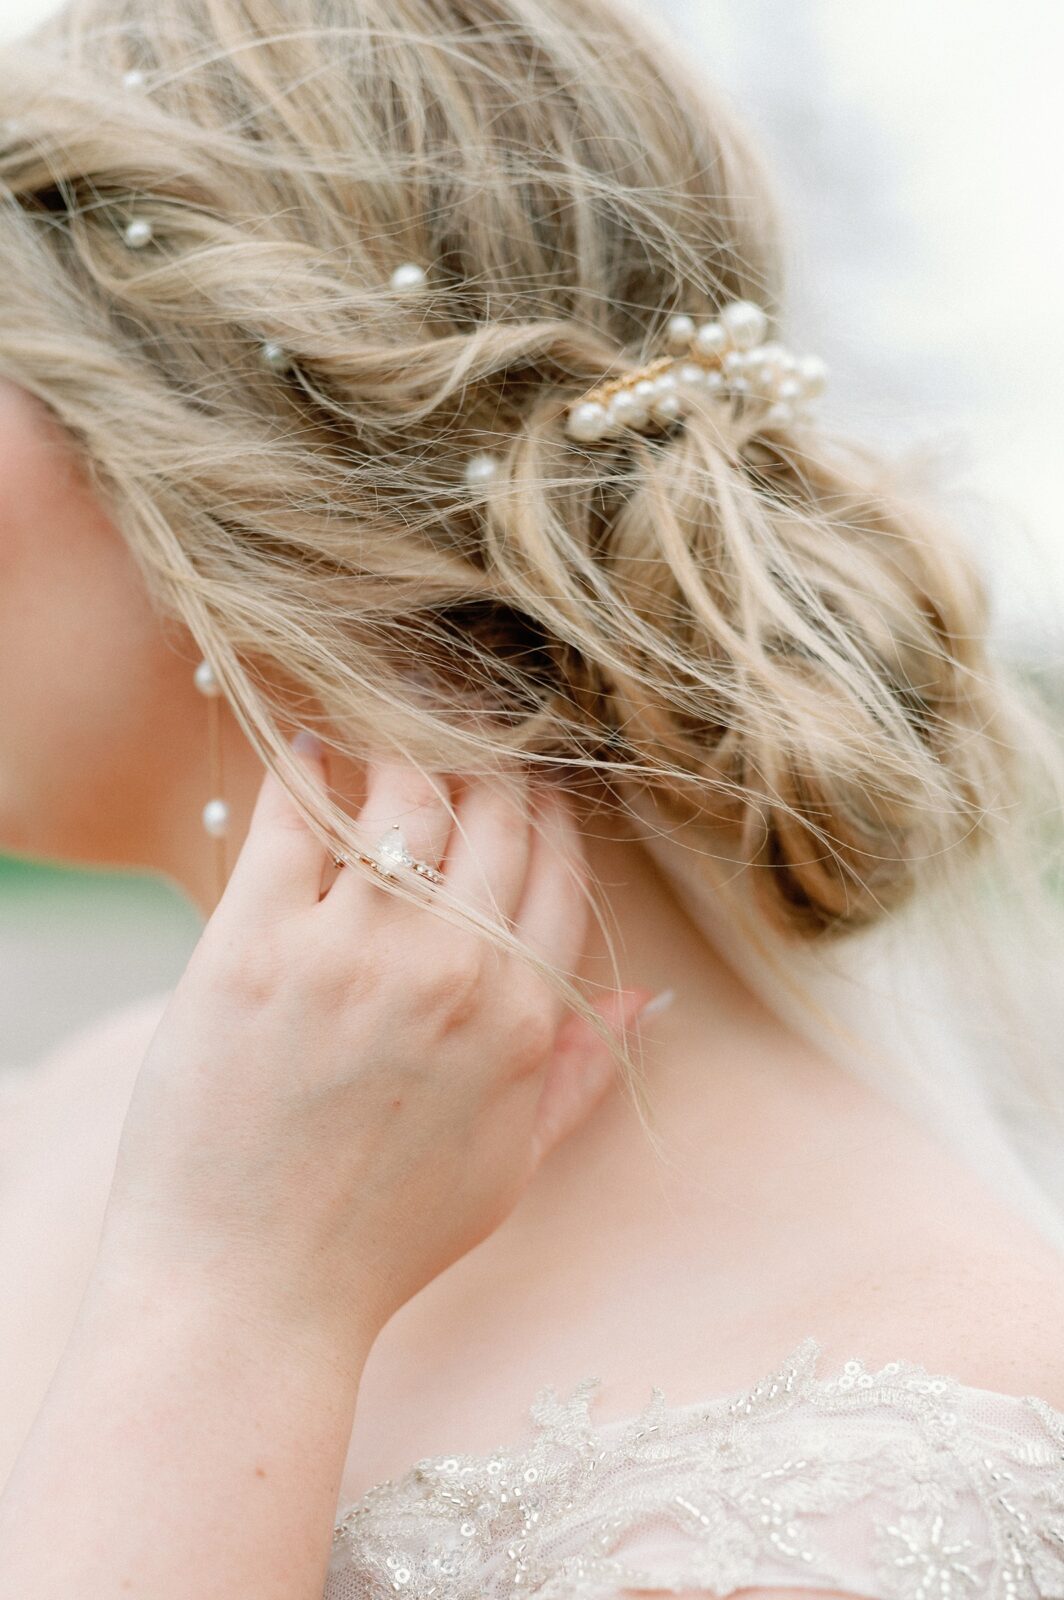 A close up detail photo of a bride's ring as she fixes her hair.